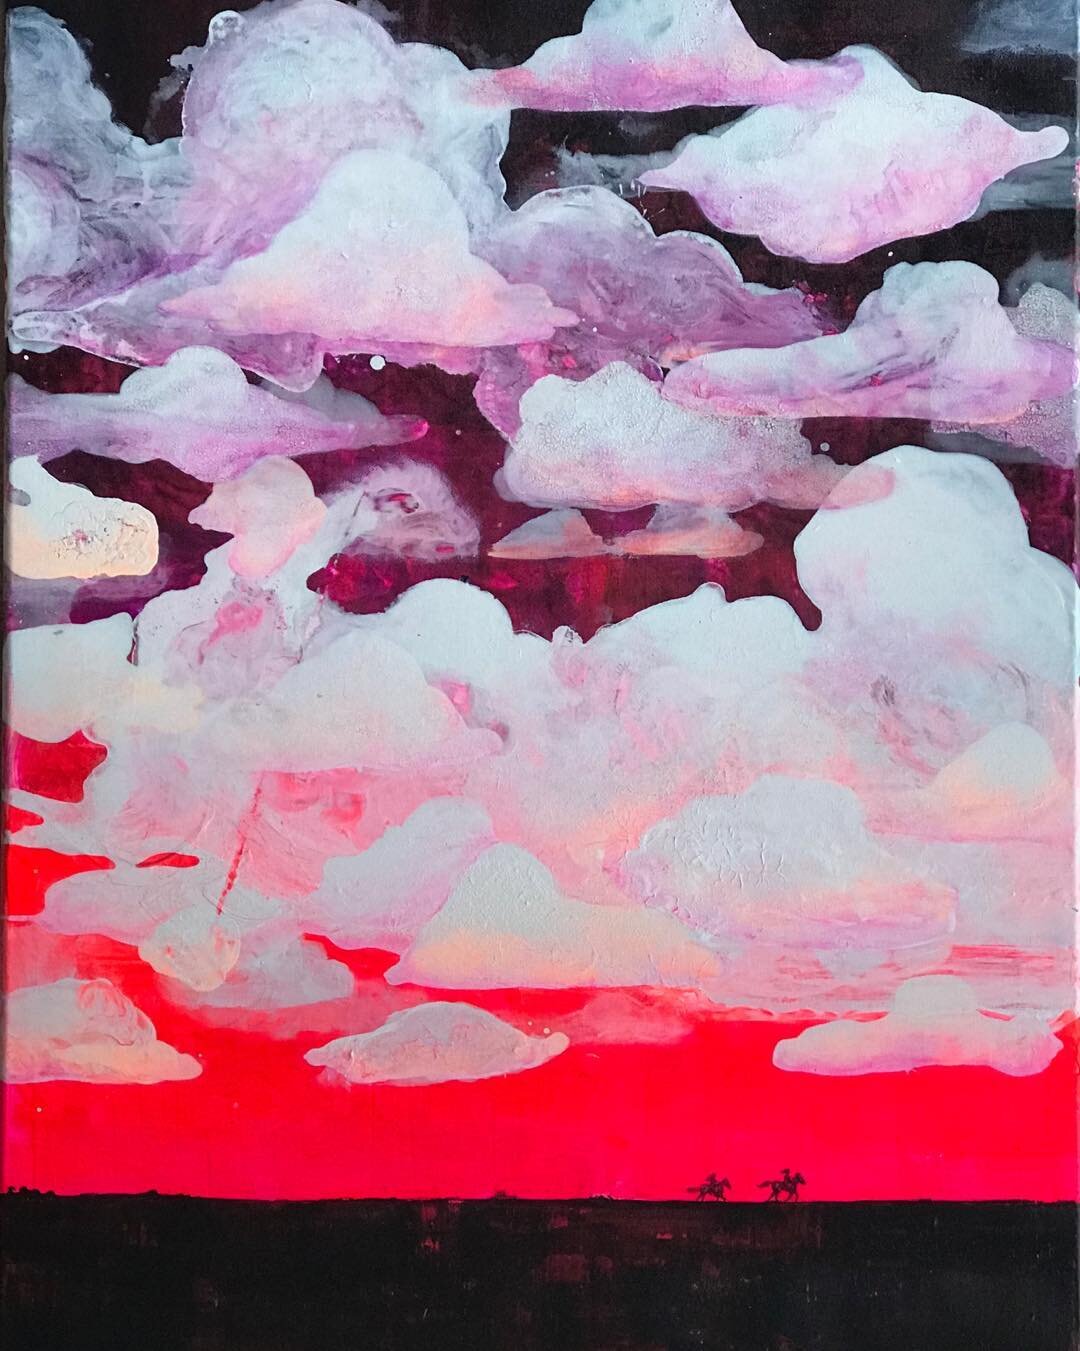 Title: Same Sky, an exploration of feminine qualities in a world without borders. #makesomethingeveryday inspired by so many artists including those from #womenartists #skyscape #painting #austinart #artaustin #clouds #mixedmedia #worldartday